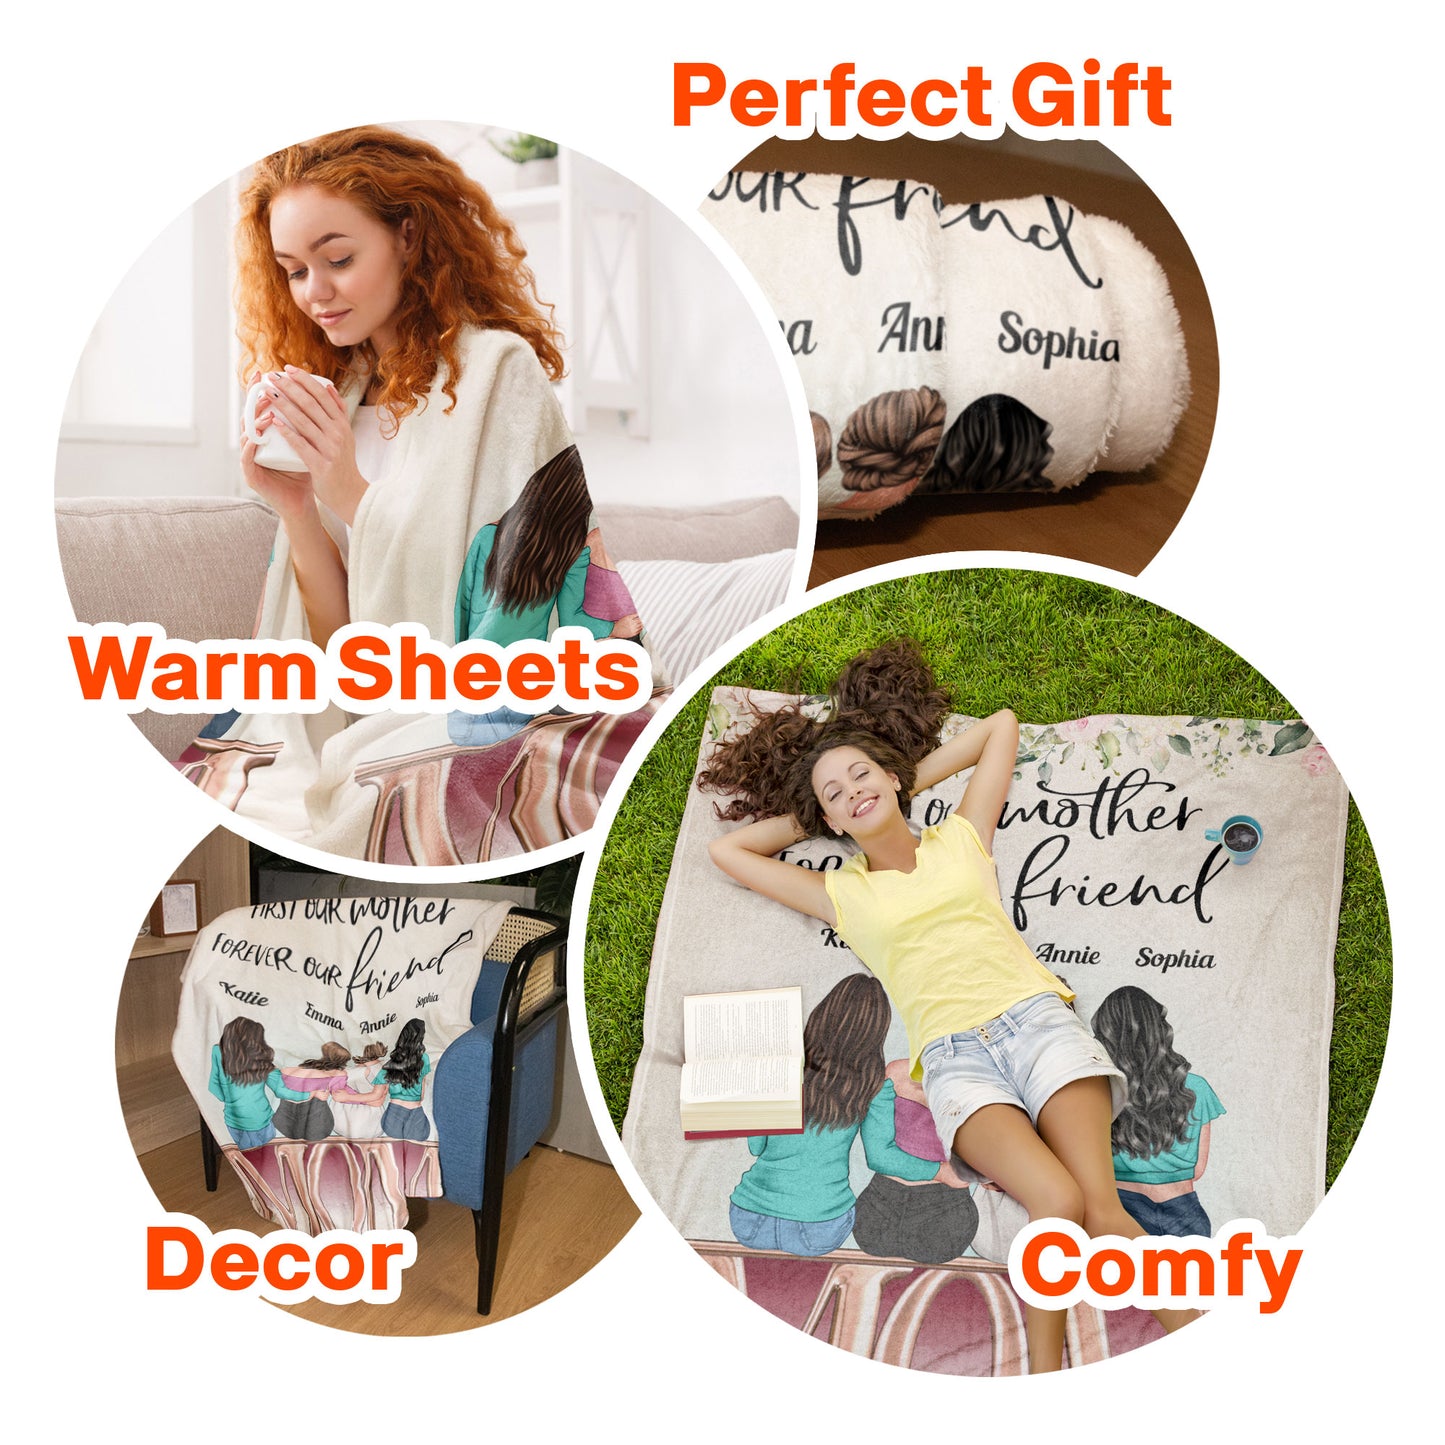 First Our Mother, Forever Our Friend - Personalized Blanket